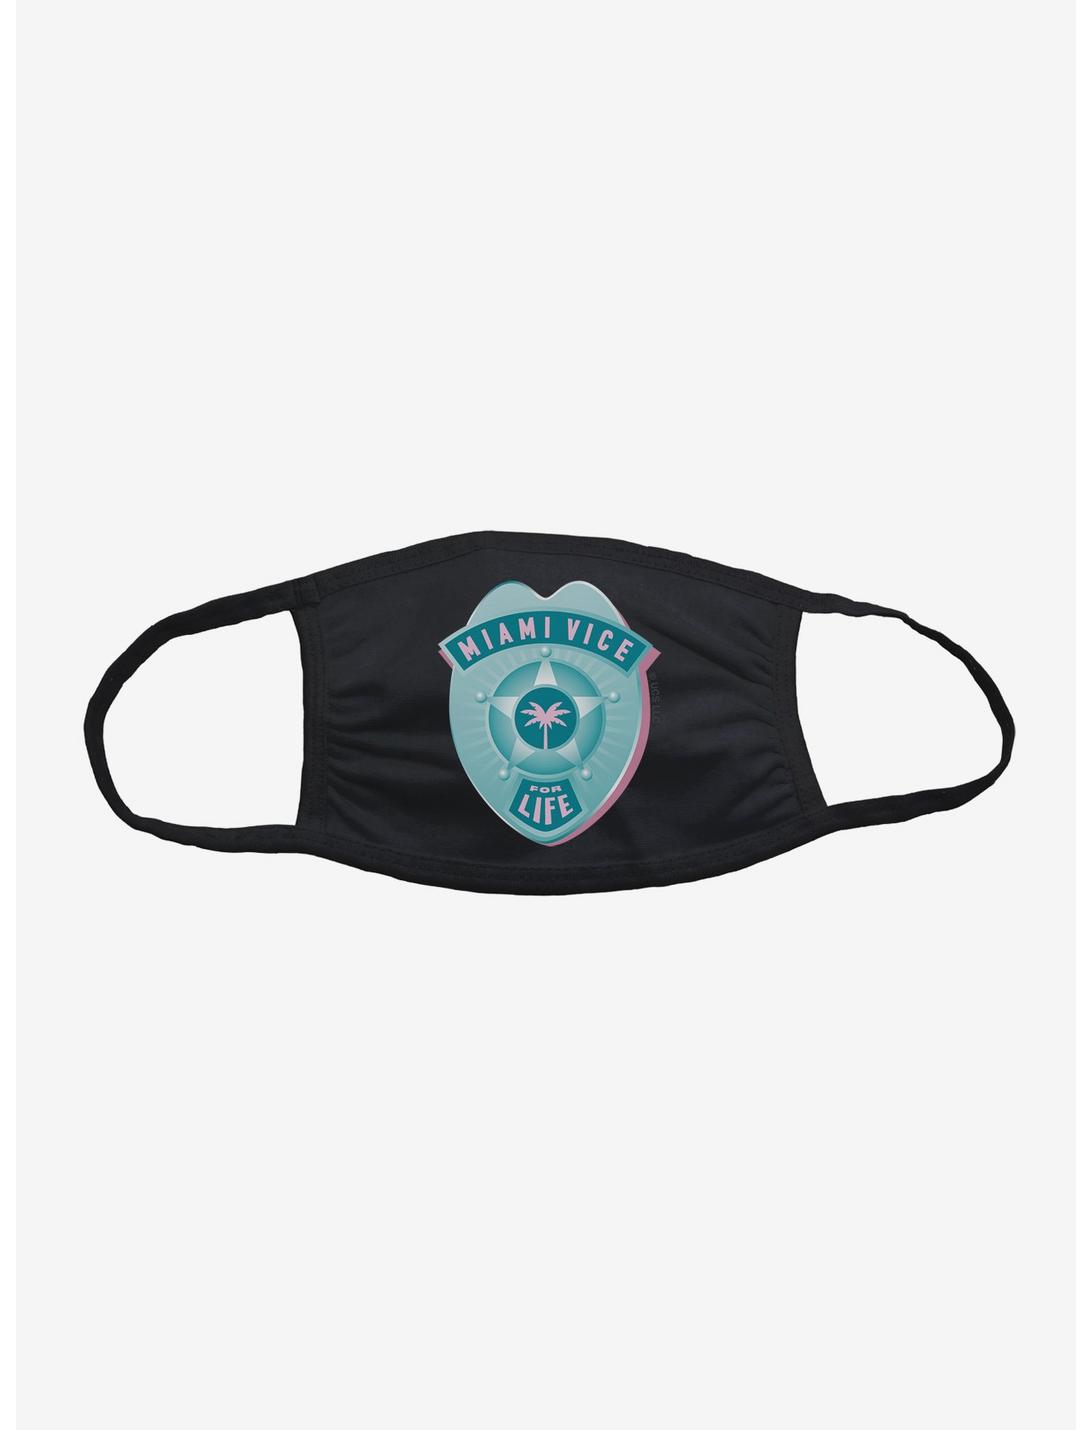 Miami Vice Badge For Life Face Mask, , hi-res